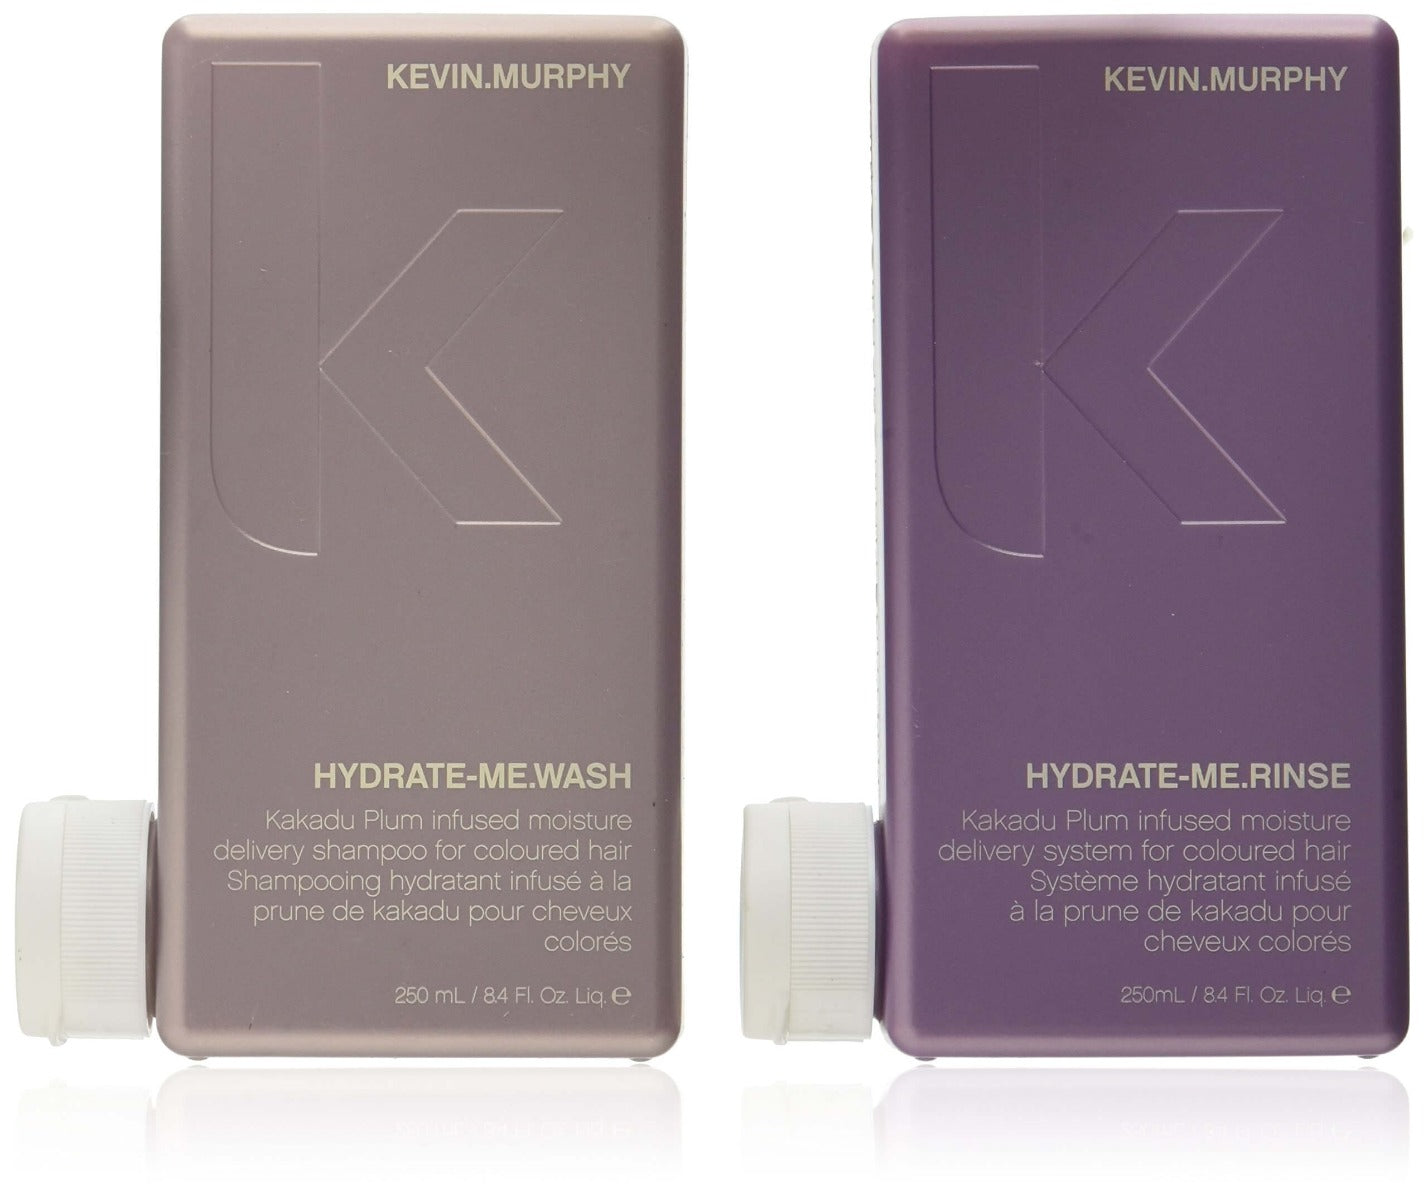 overgive udpege Få Kevin.Murphy Hydrate me Wash & Rinse Duo 8.5oz – Shampoo Zone